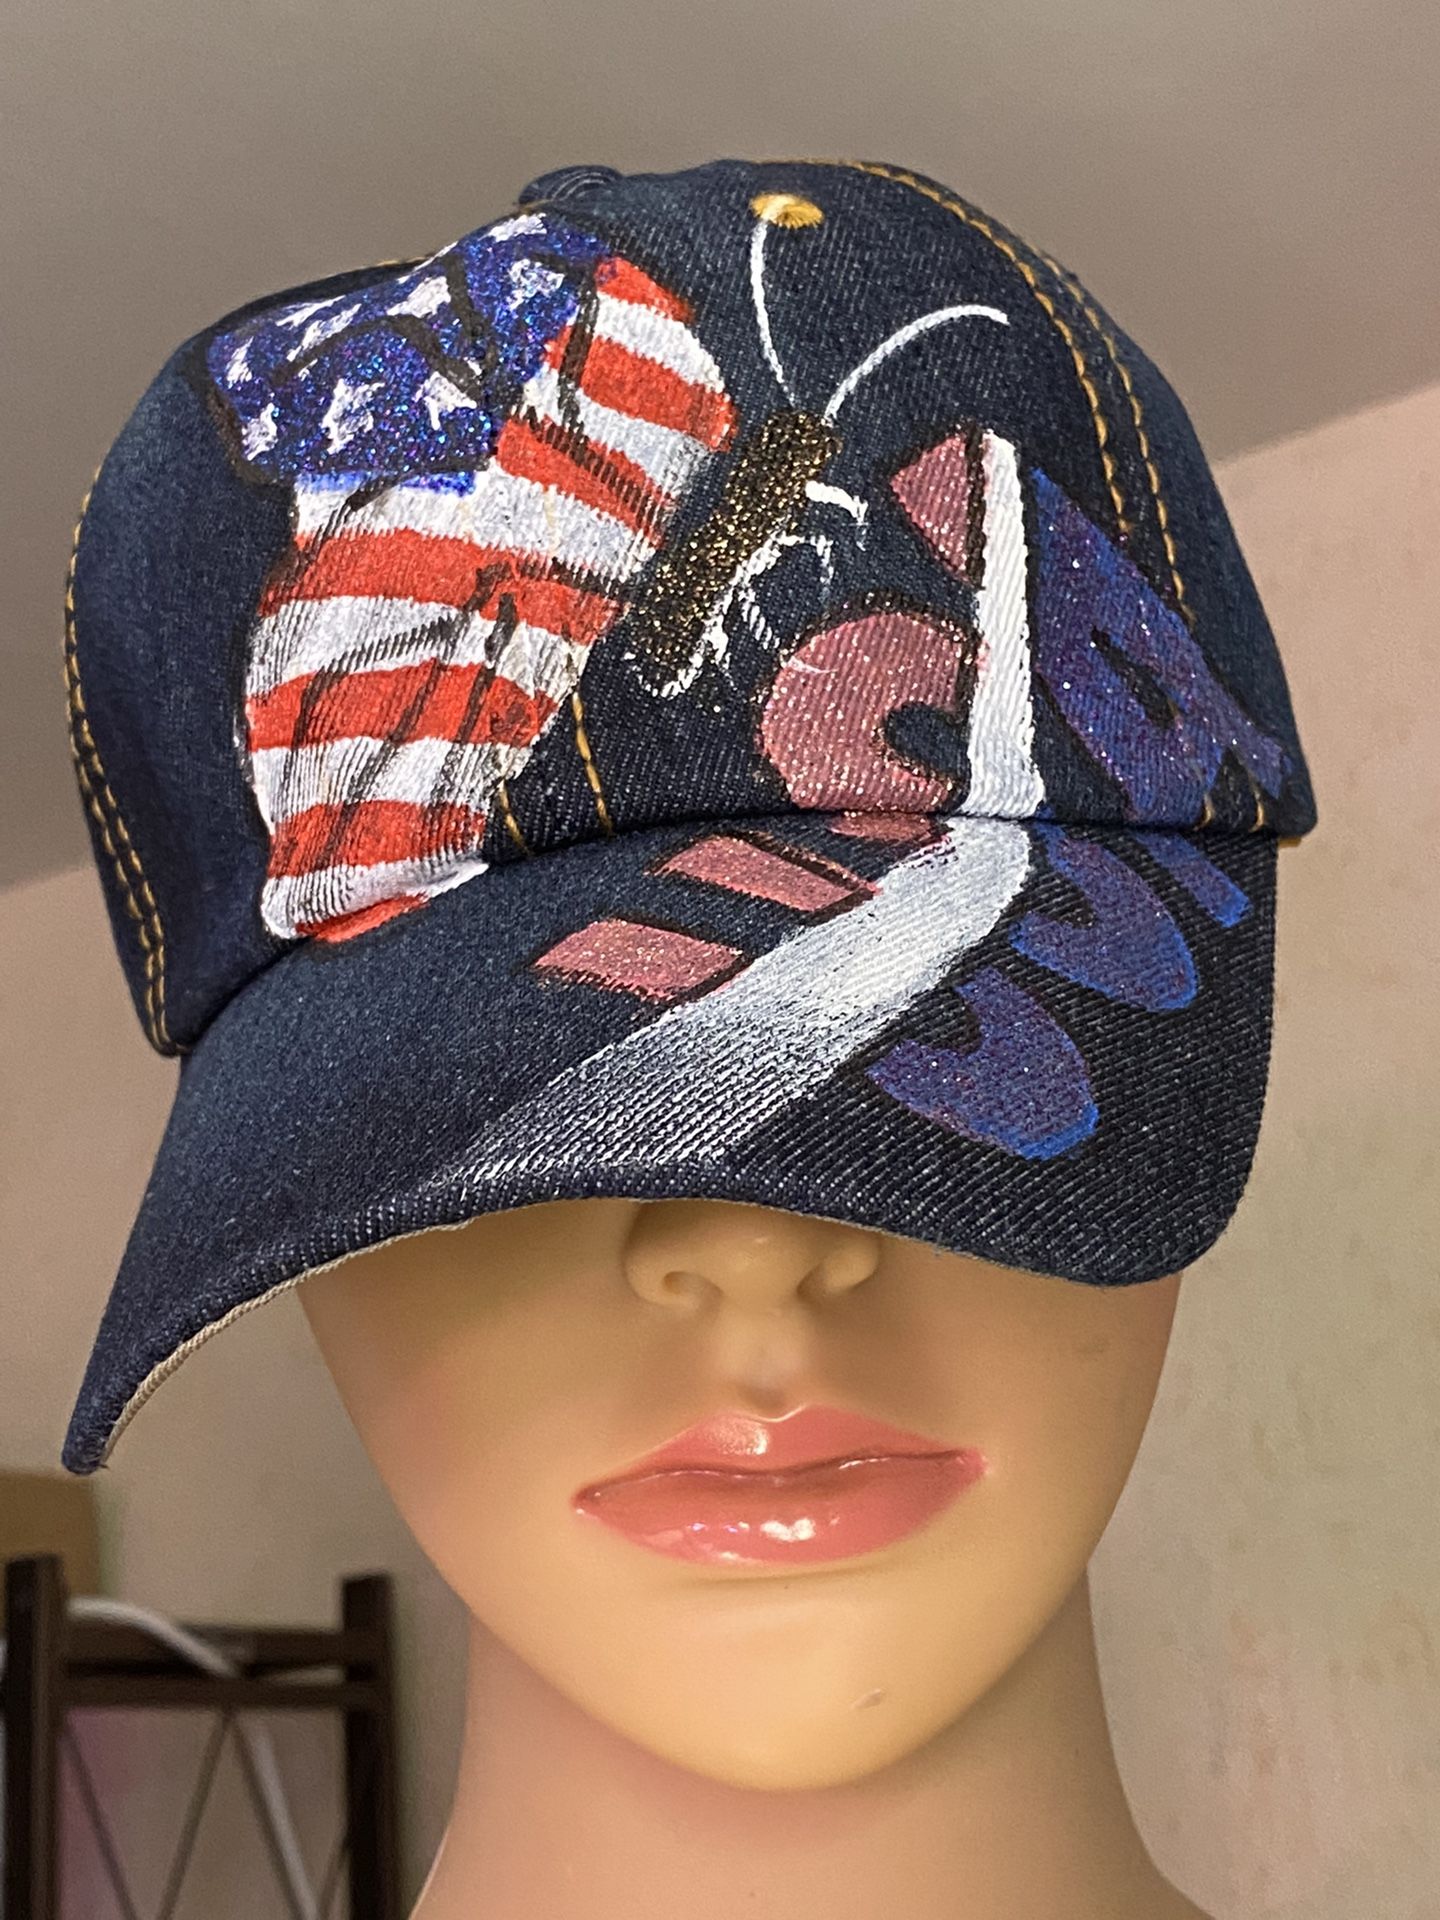 STYLE #10-BUTTERFLY FLAG. CUTE HAT W/SEMI-BLING. SHINES IN THE LIGHT.